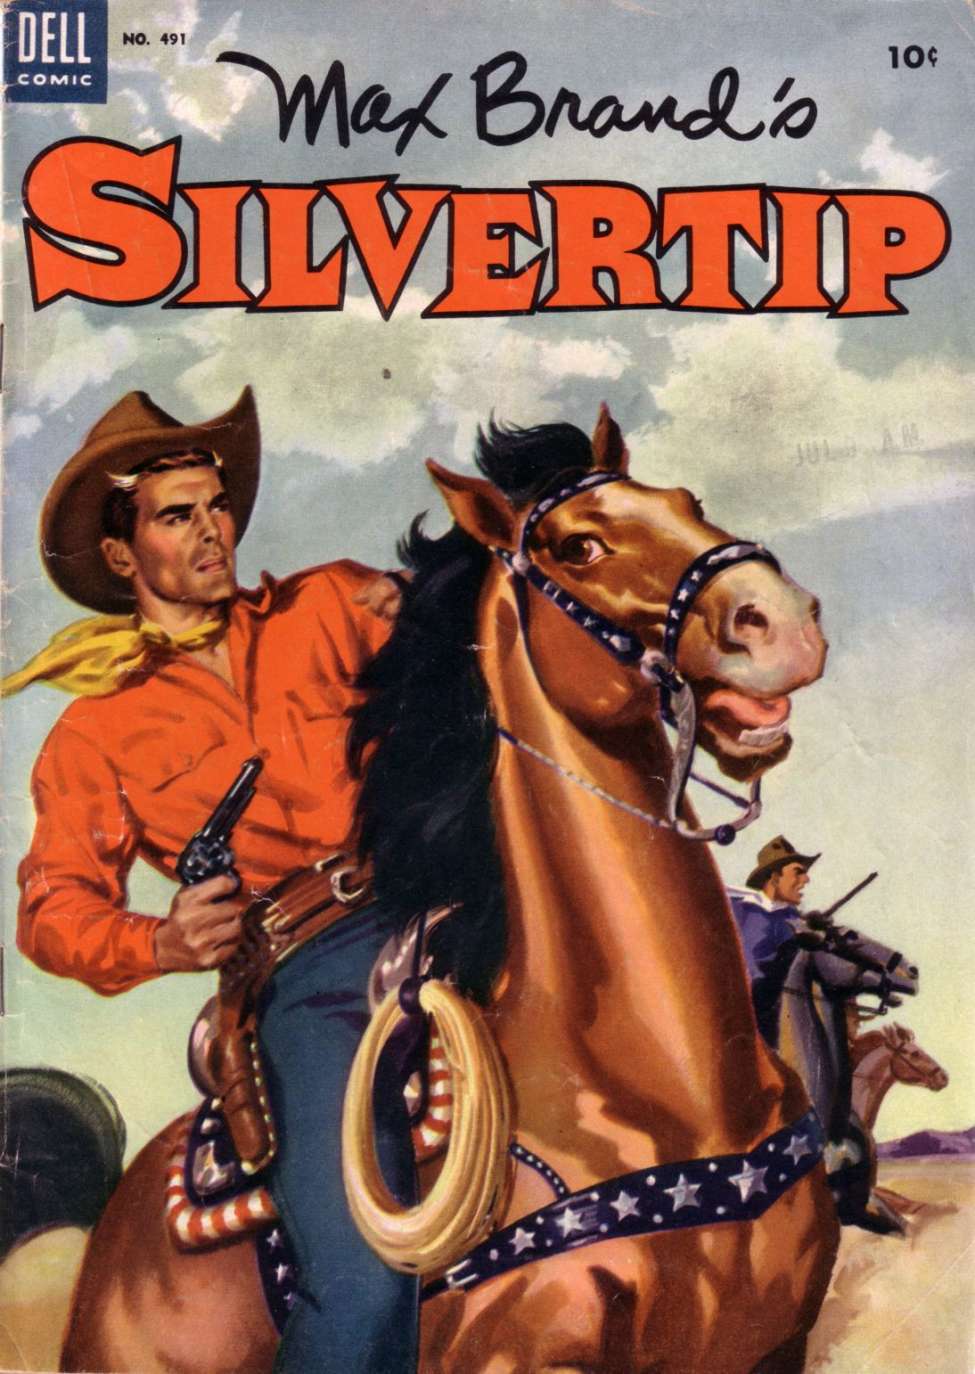 Book Cover For 0491 - Max Brand's Silvertip